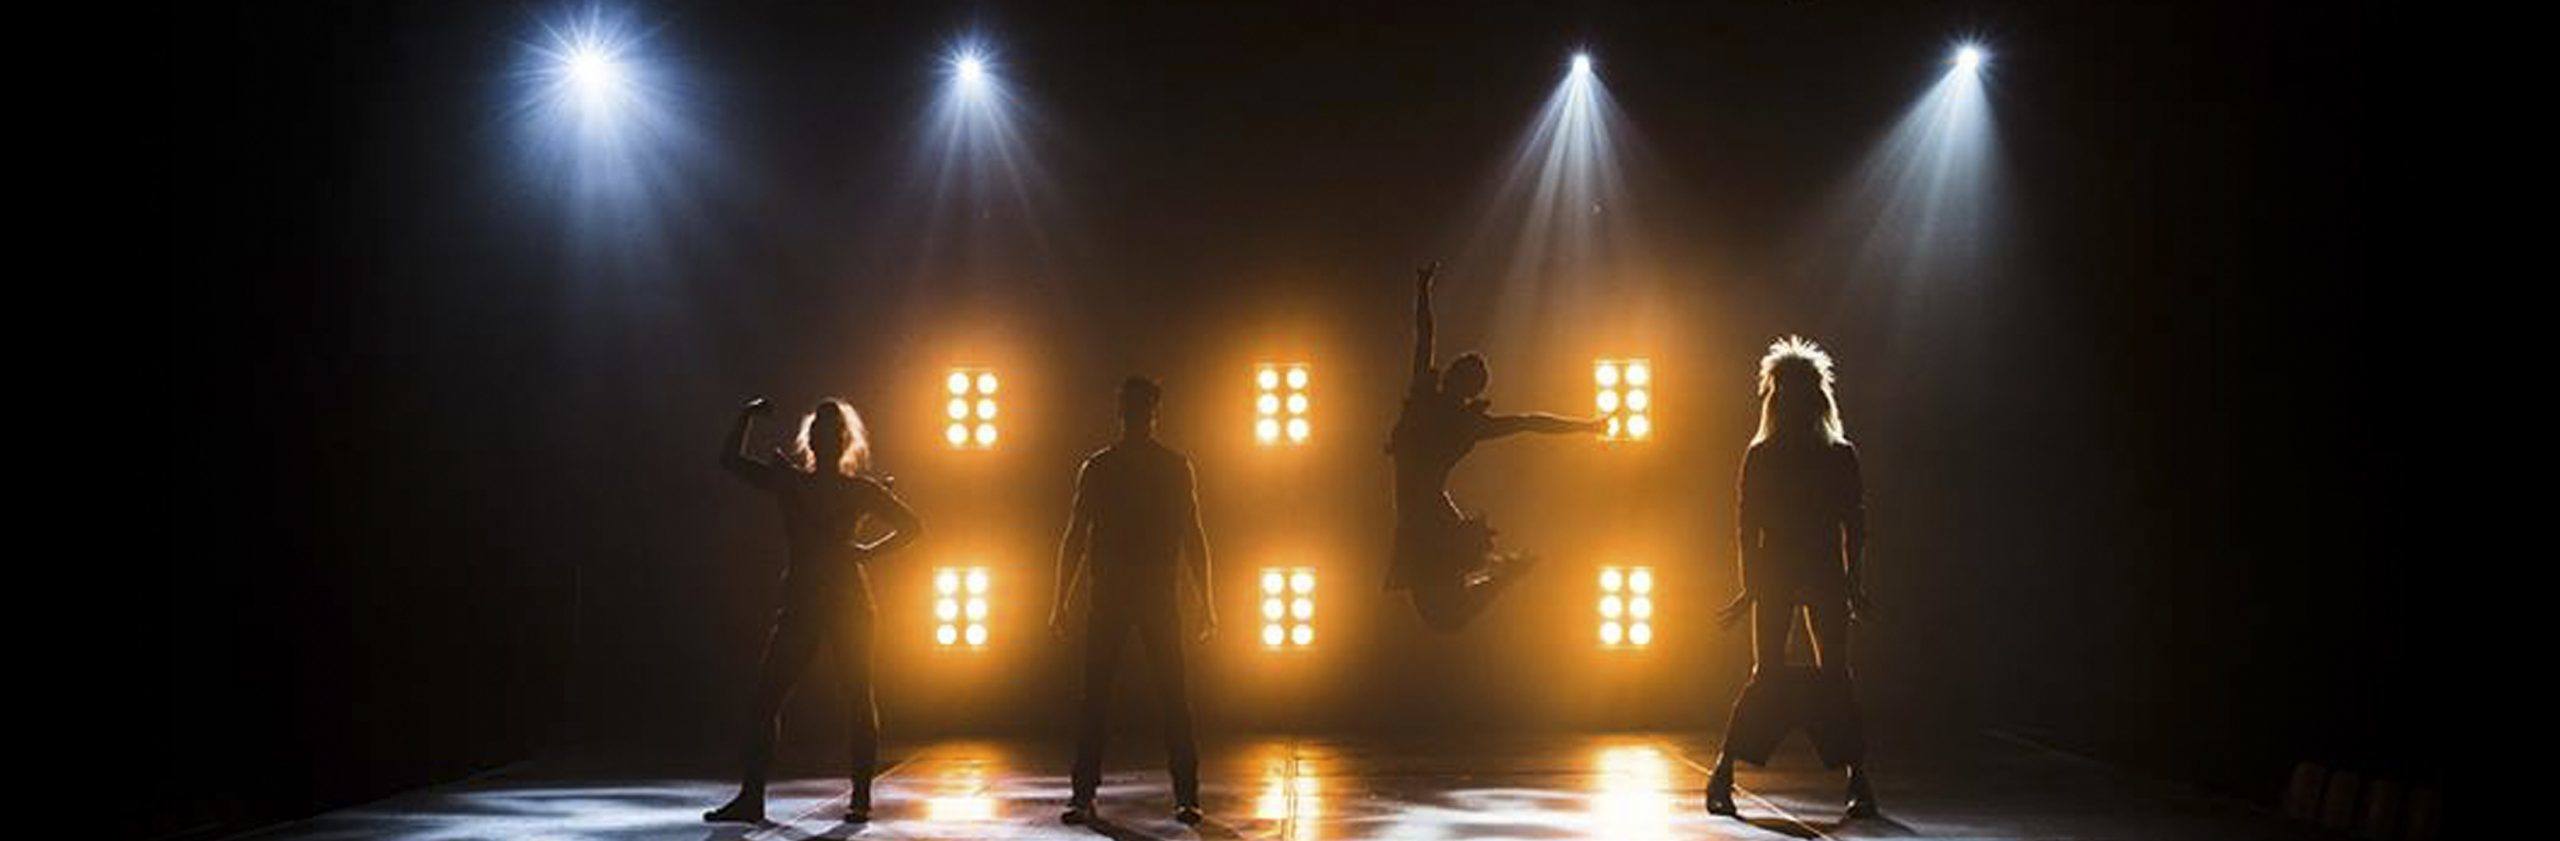 circus artists backlit with a dramatic lighting design